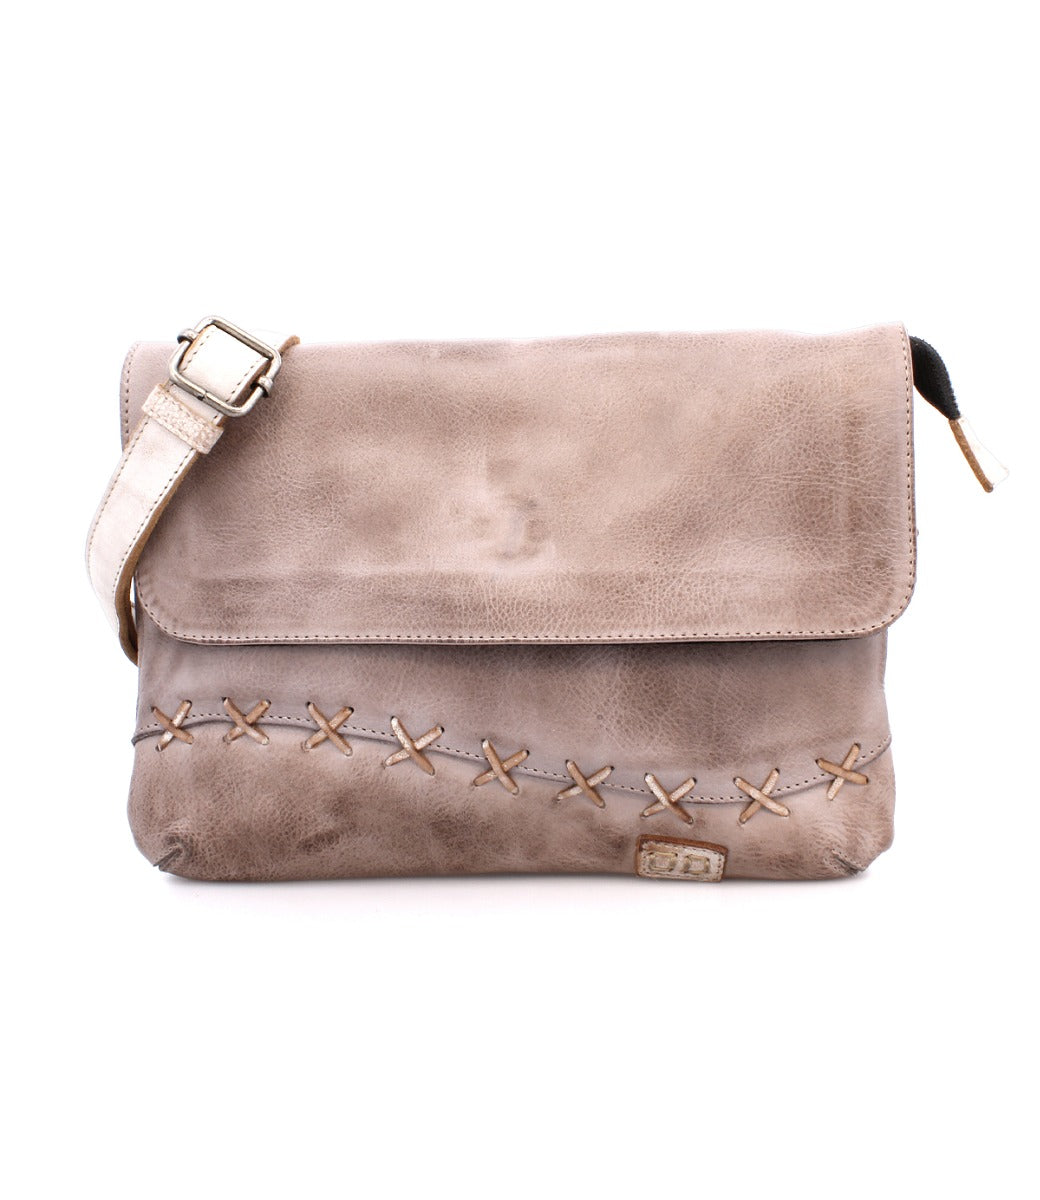 A leather crossbody bag with straps and studs by Bed Stu.